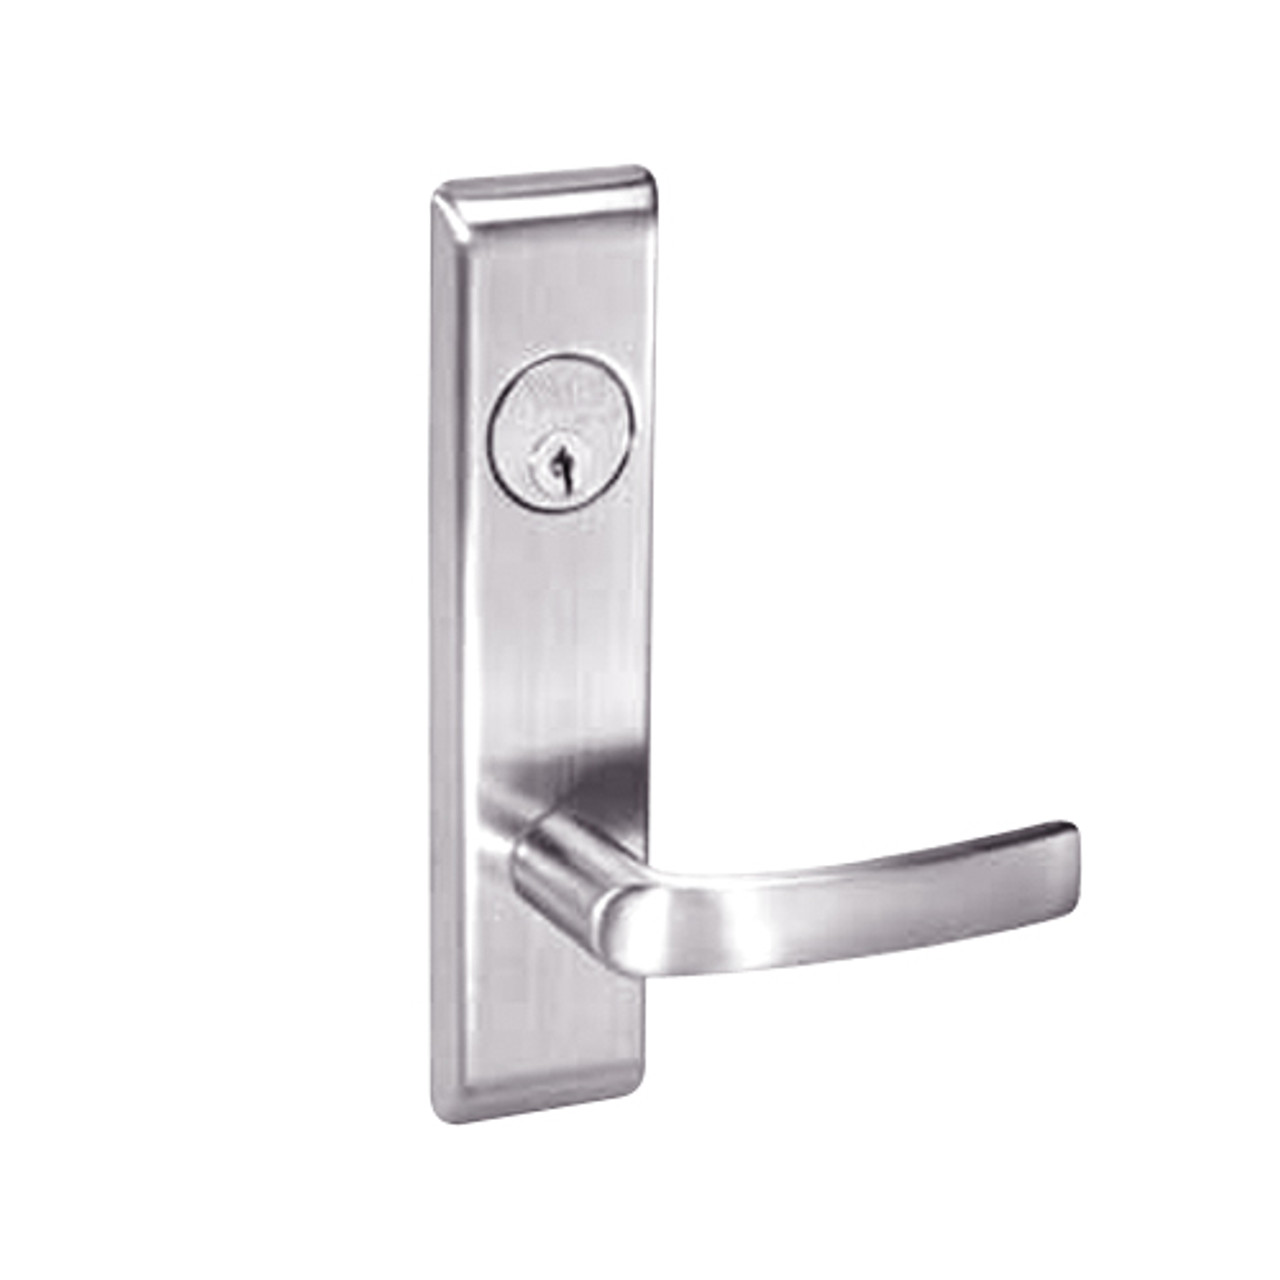 MOCN8822FL-629 Yale 8800FL Series Single Cylinder with Deadbolt Mortise Bathroom Lock with Indicator with Monroe Lever in Bright Stainless Steel